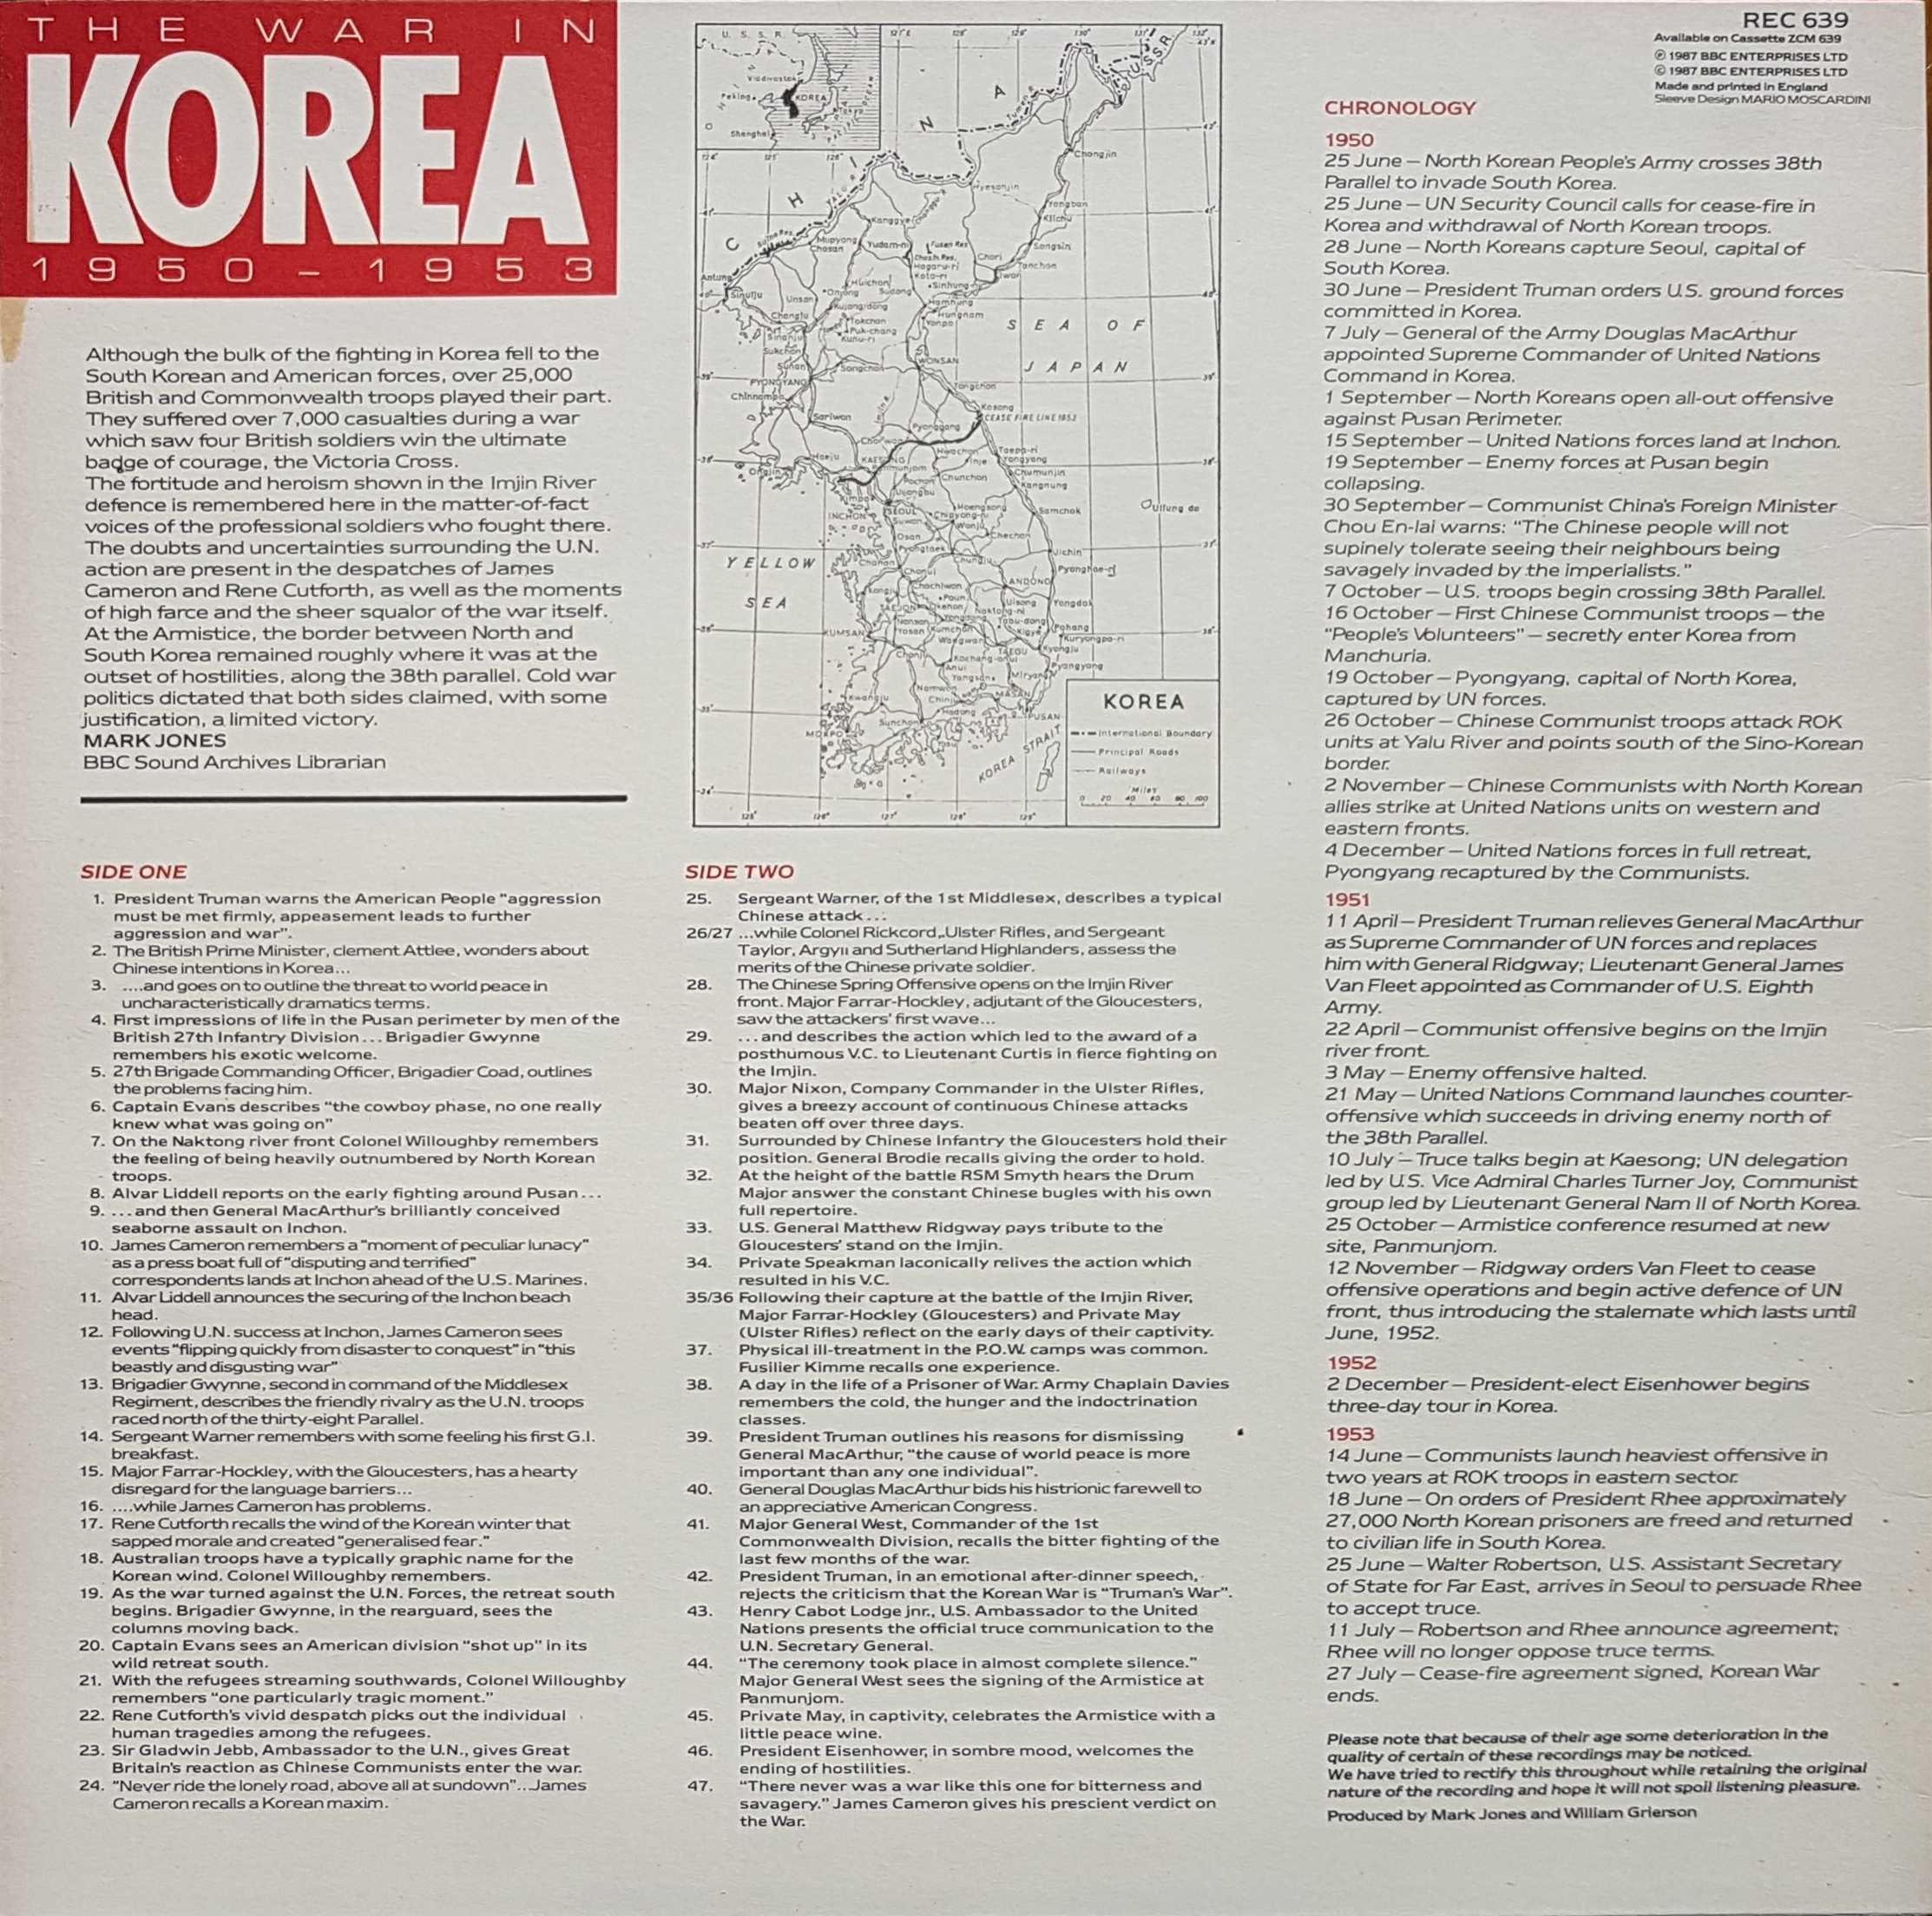 Picture of REC 639 The war in Korea by artist Various from the BBC records and Tapes library